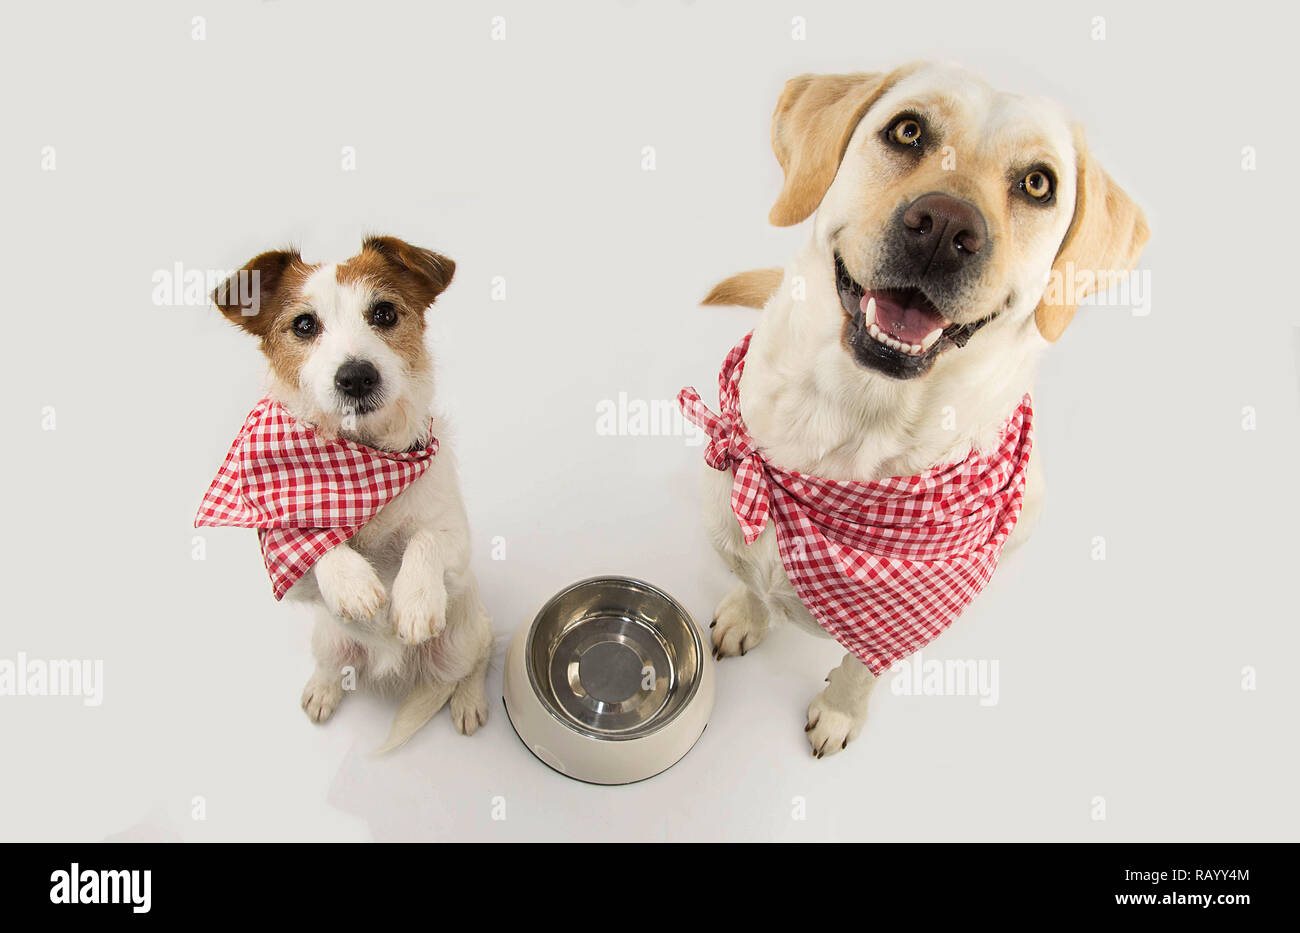 TWO DOGS BEGGING FOOD. LABRADOR AND JACK RUSSELL WAITING FOR EAT WITH A EMPTY BOWL. STANDING ON TWO LEGS. DRESSED WITH RED CHECKERED NAPKING NECK BAND Stock Photo